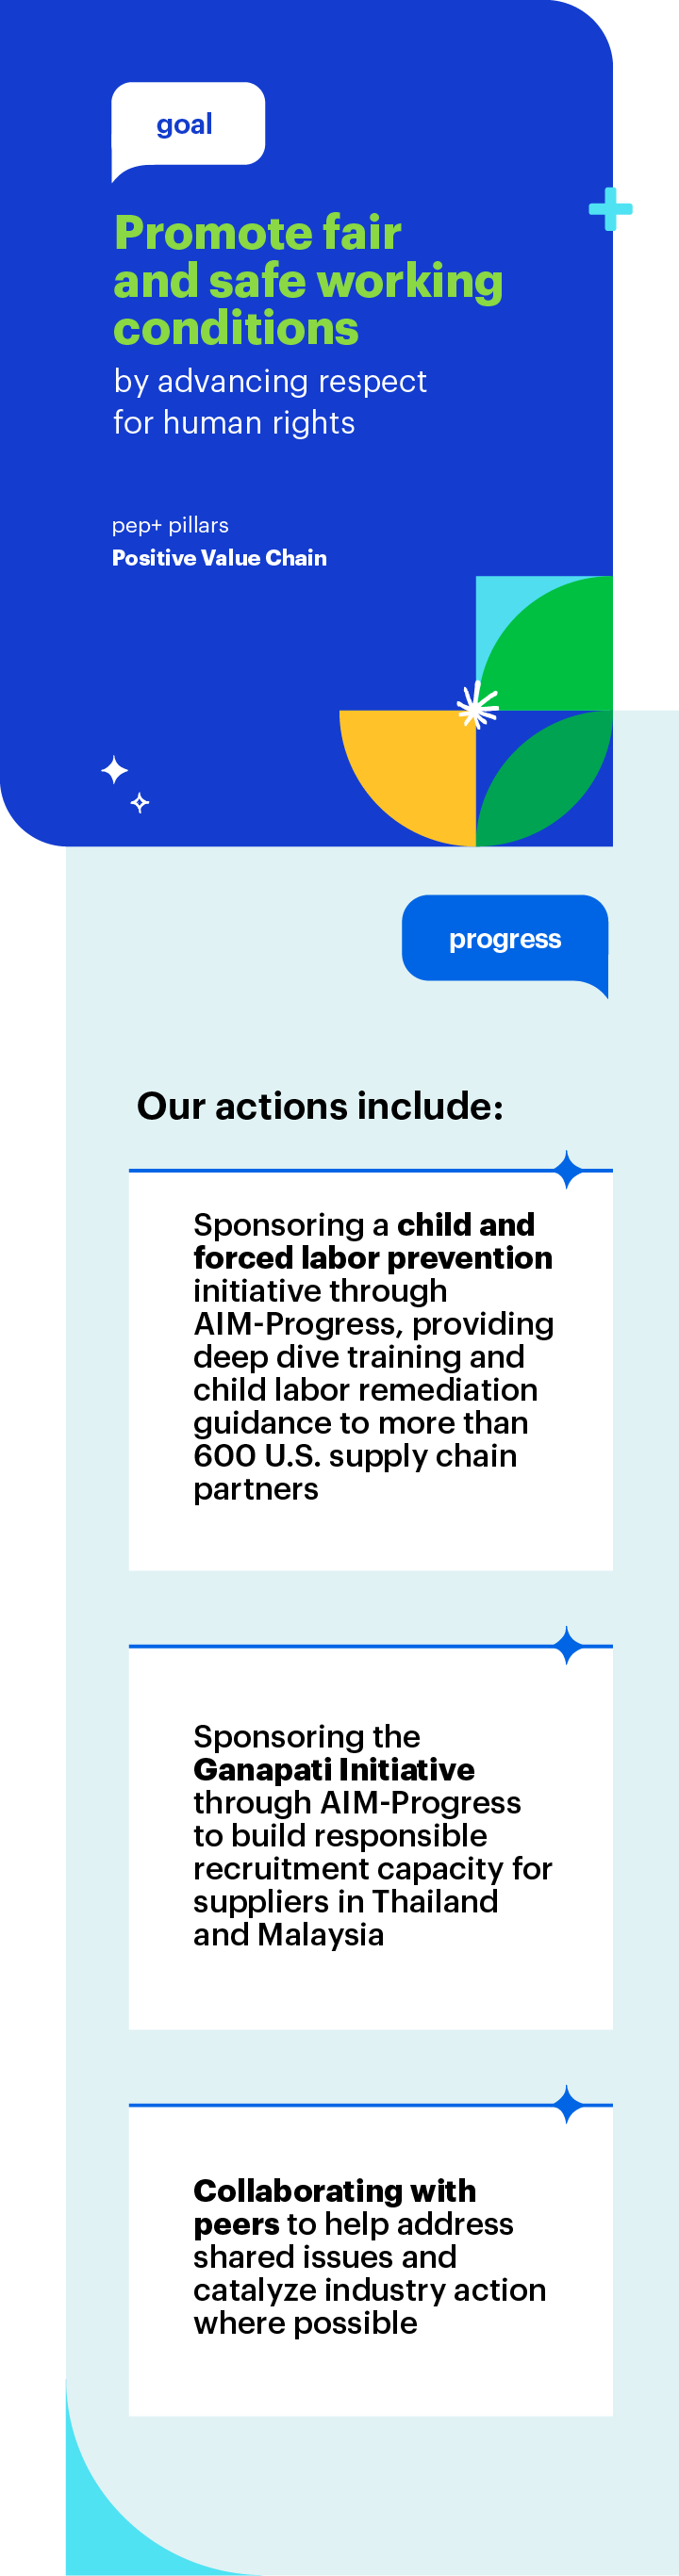 Goal: Promote fair and safe working conditions for all by advancing respect for human rights everywhere we operate and throughout our business activities